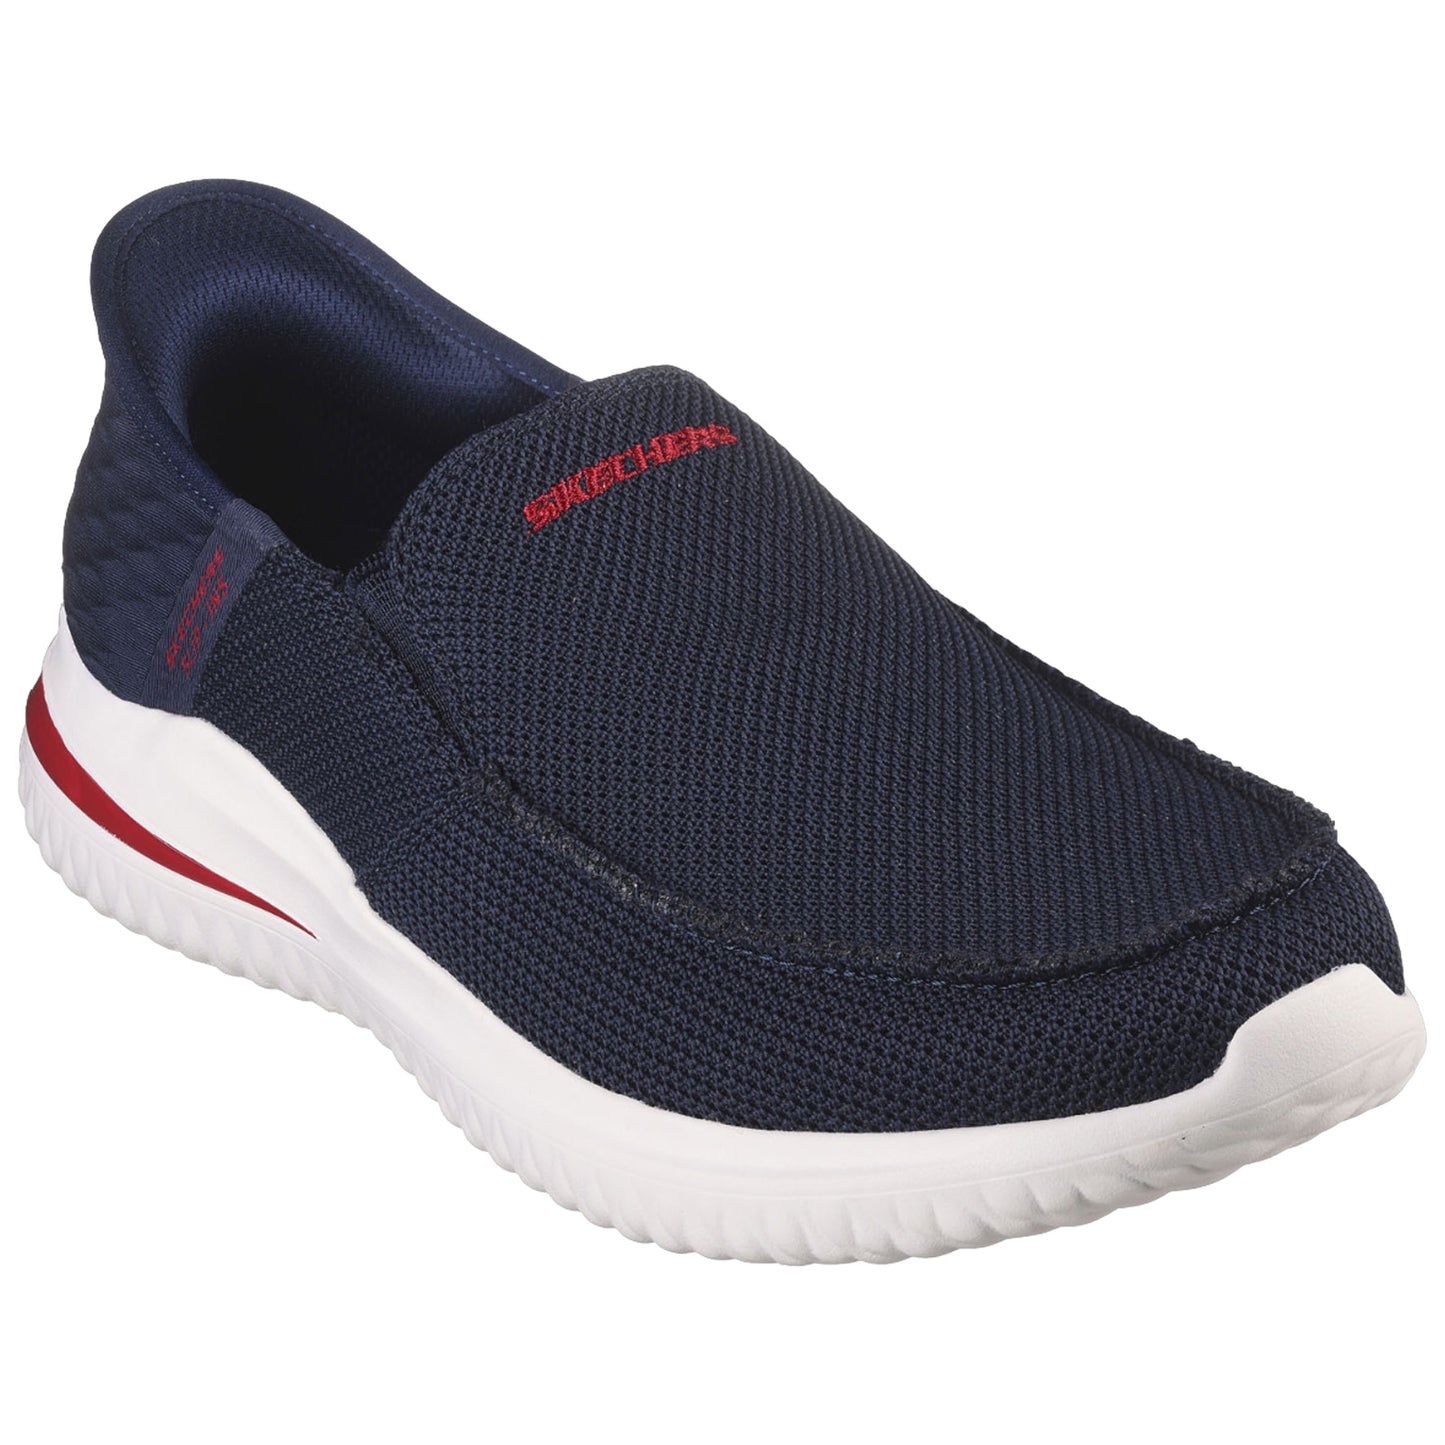 Skechers Mens Delson 3.0 Cabrino Slip-Ins Trainers